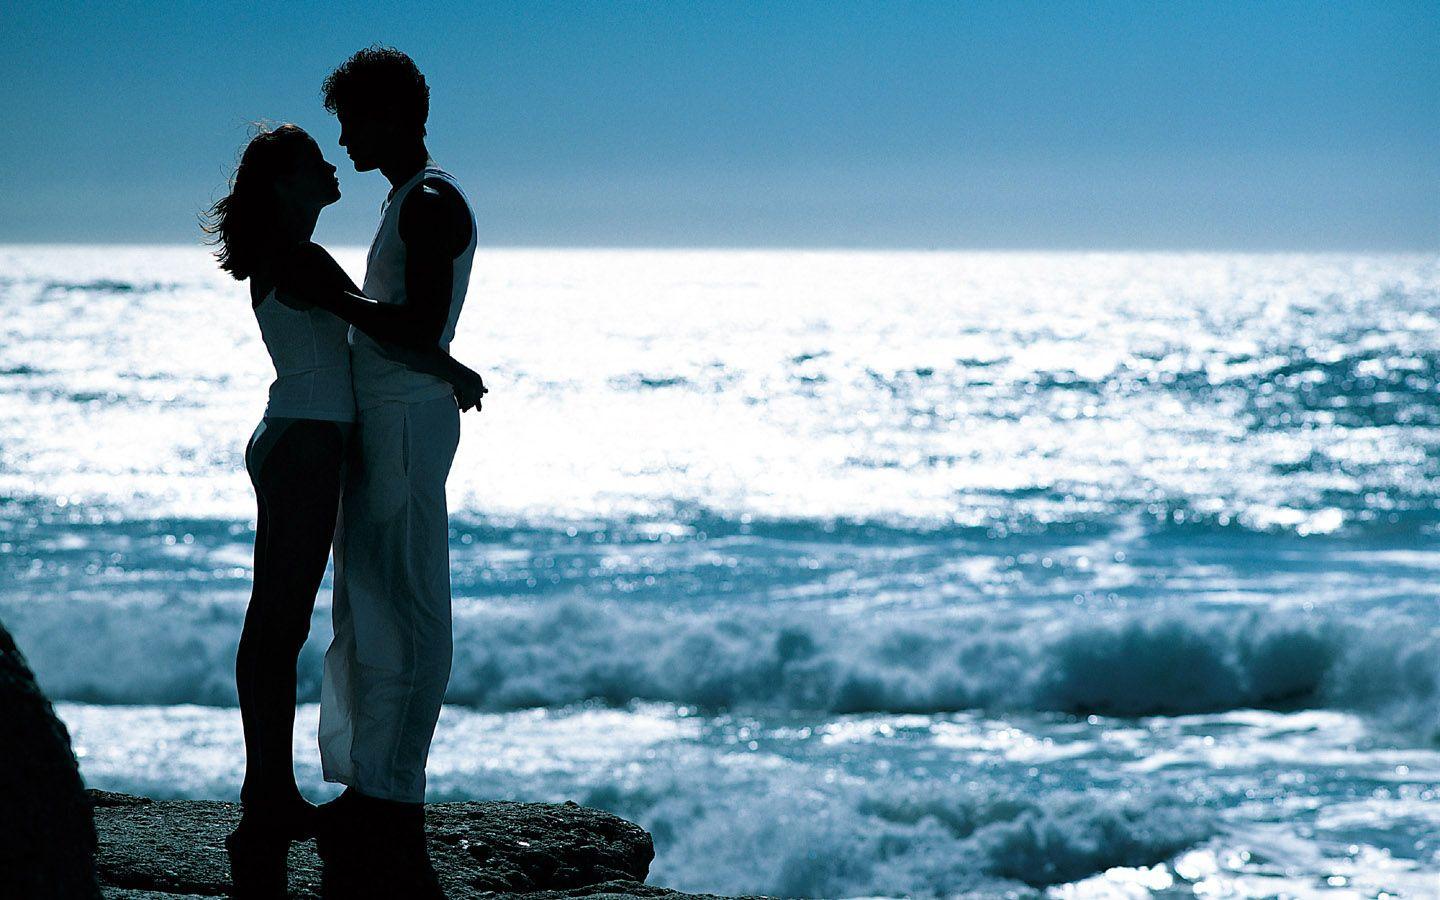 Love Couples Image For Facebook Cover Page